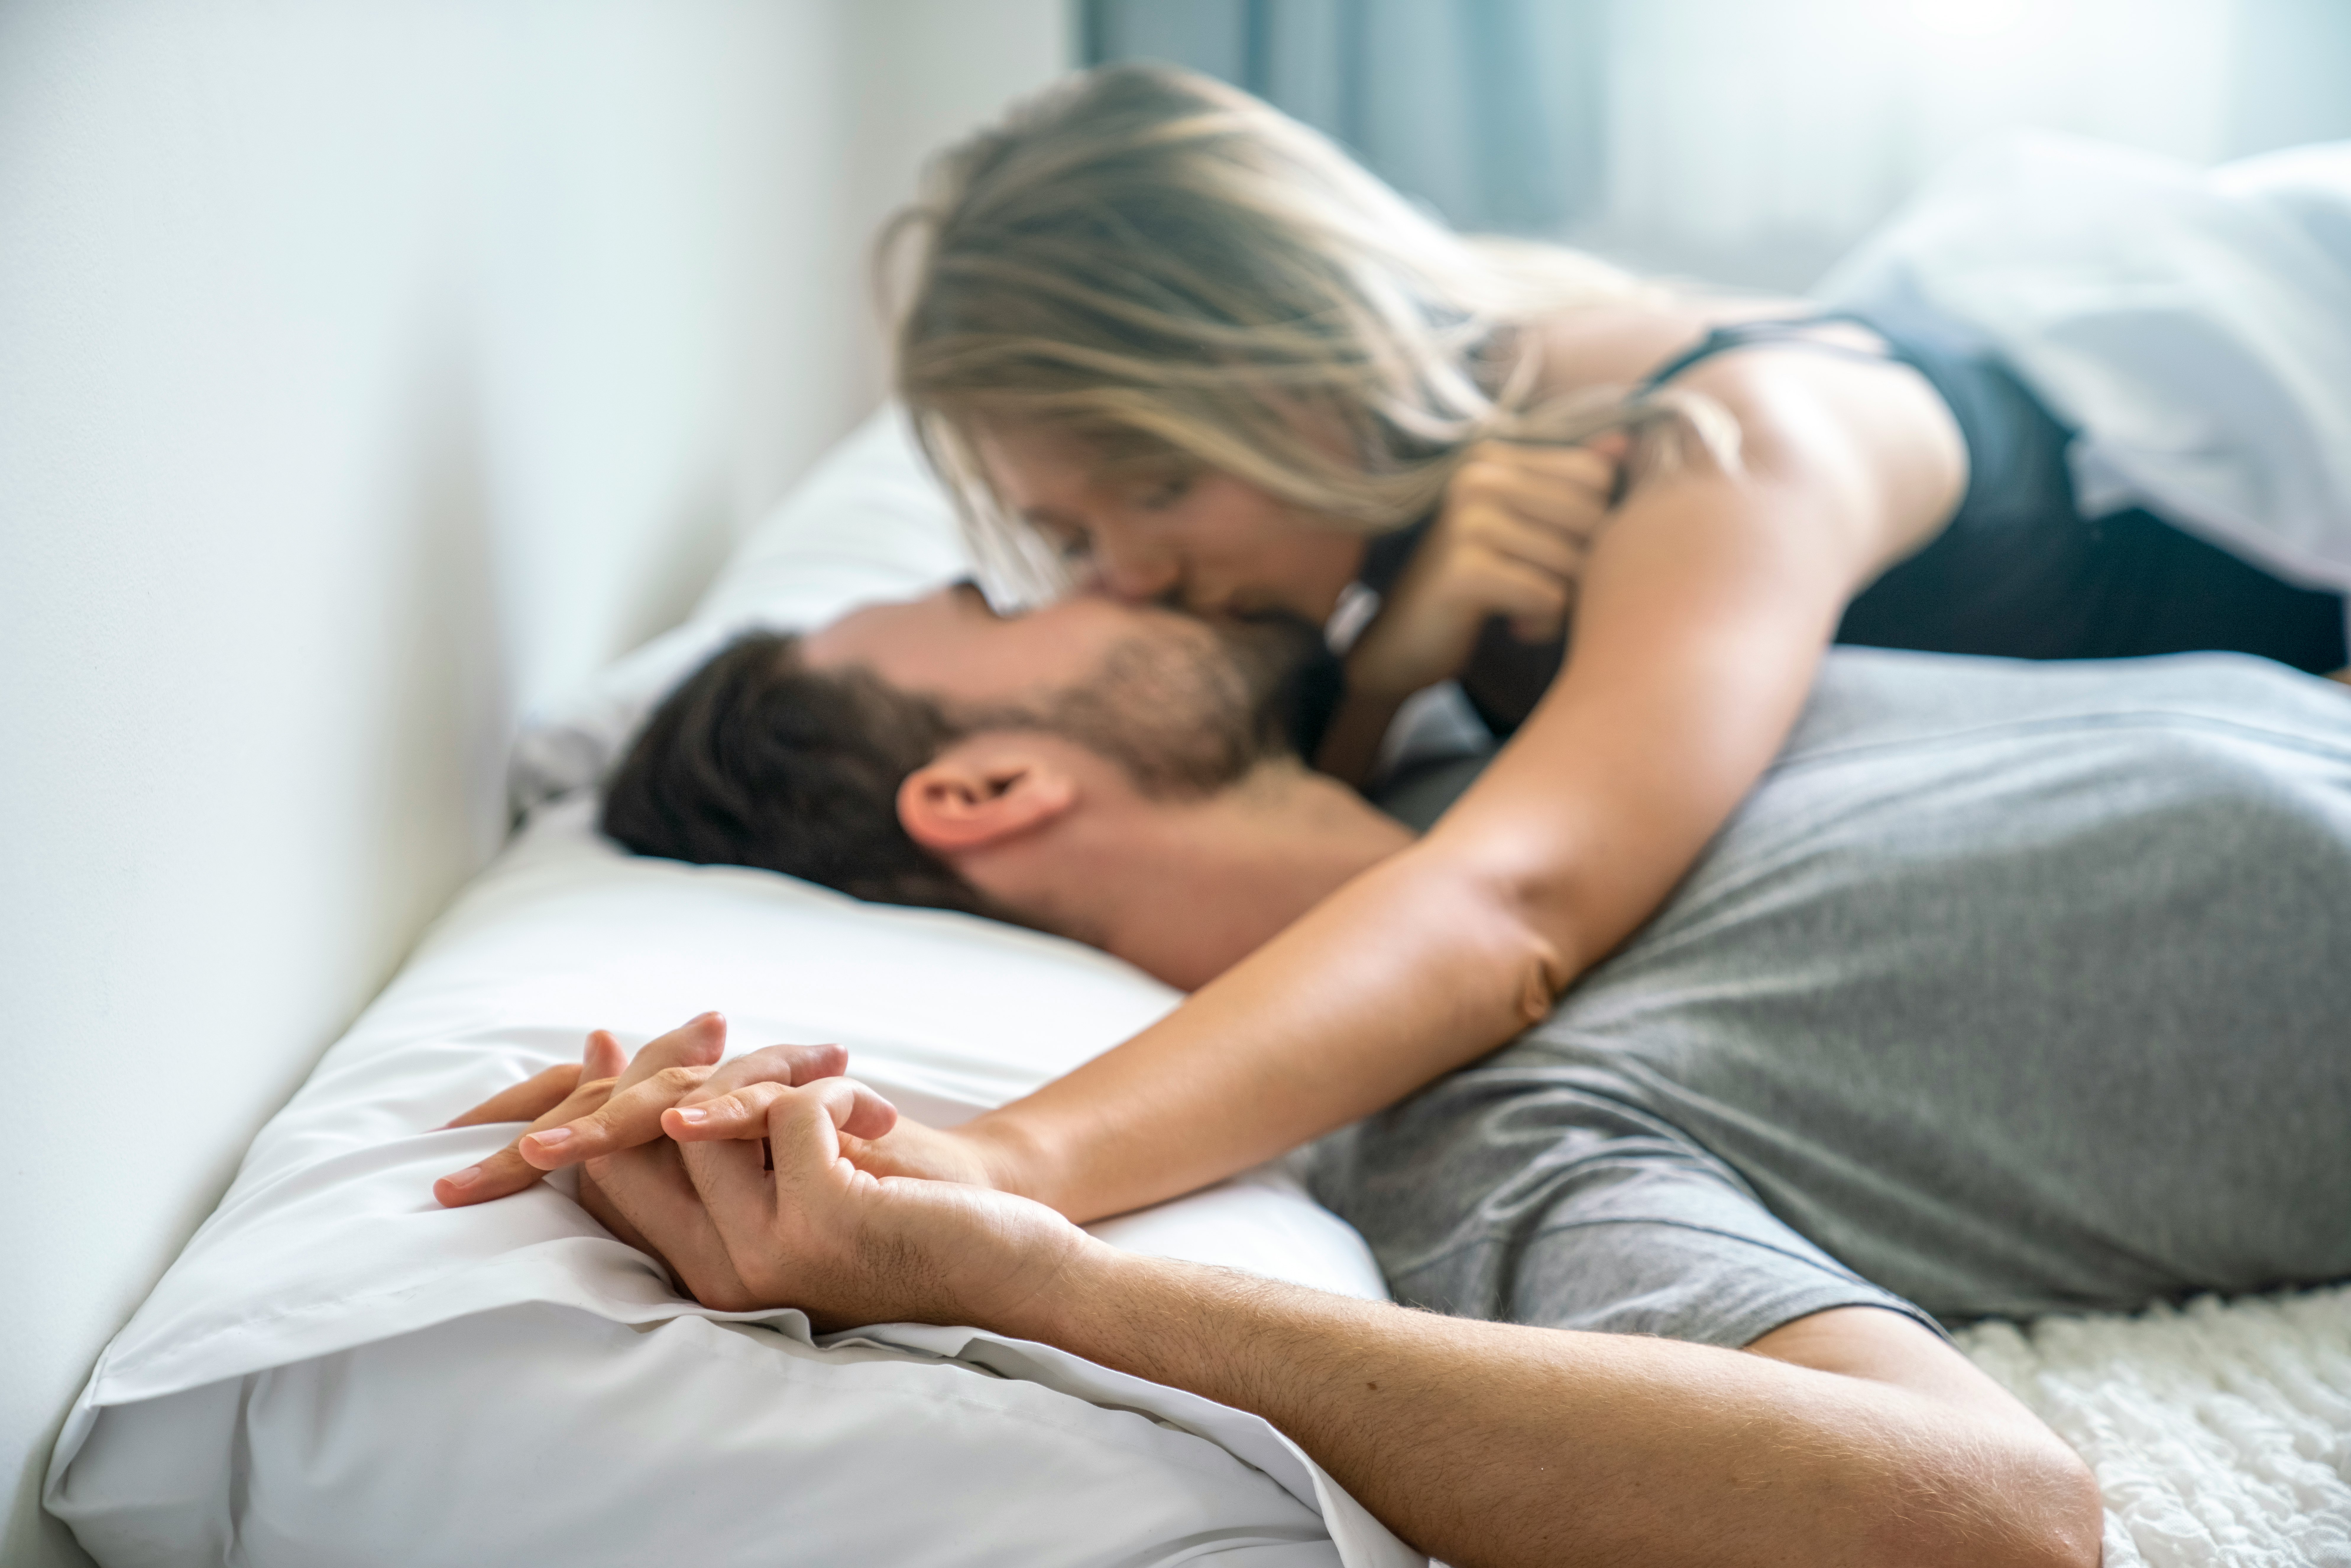 31 Sex Positions To Try Every Day Of The Month